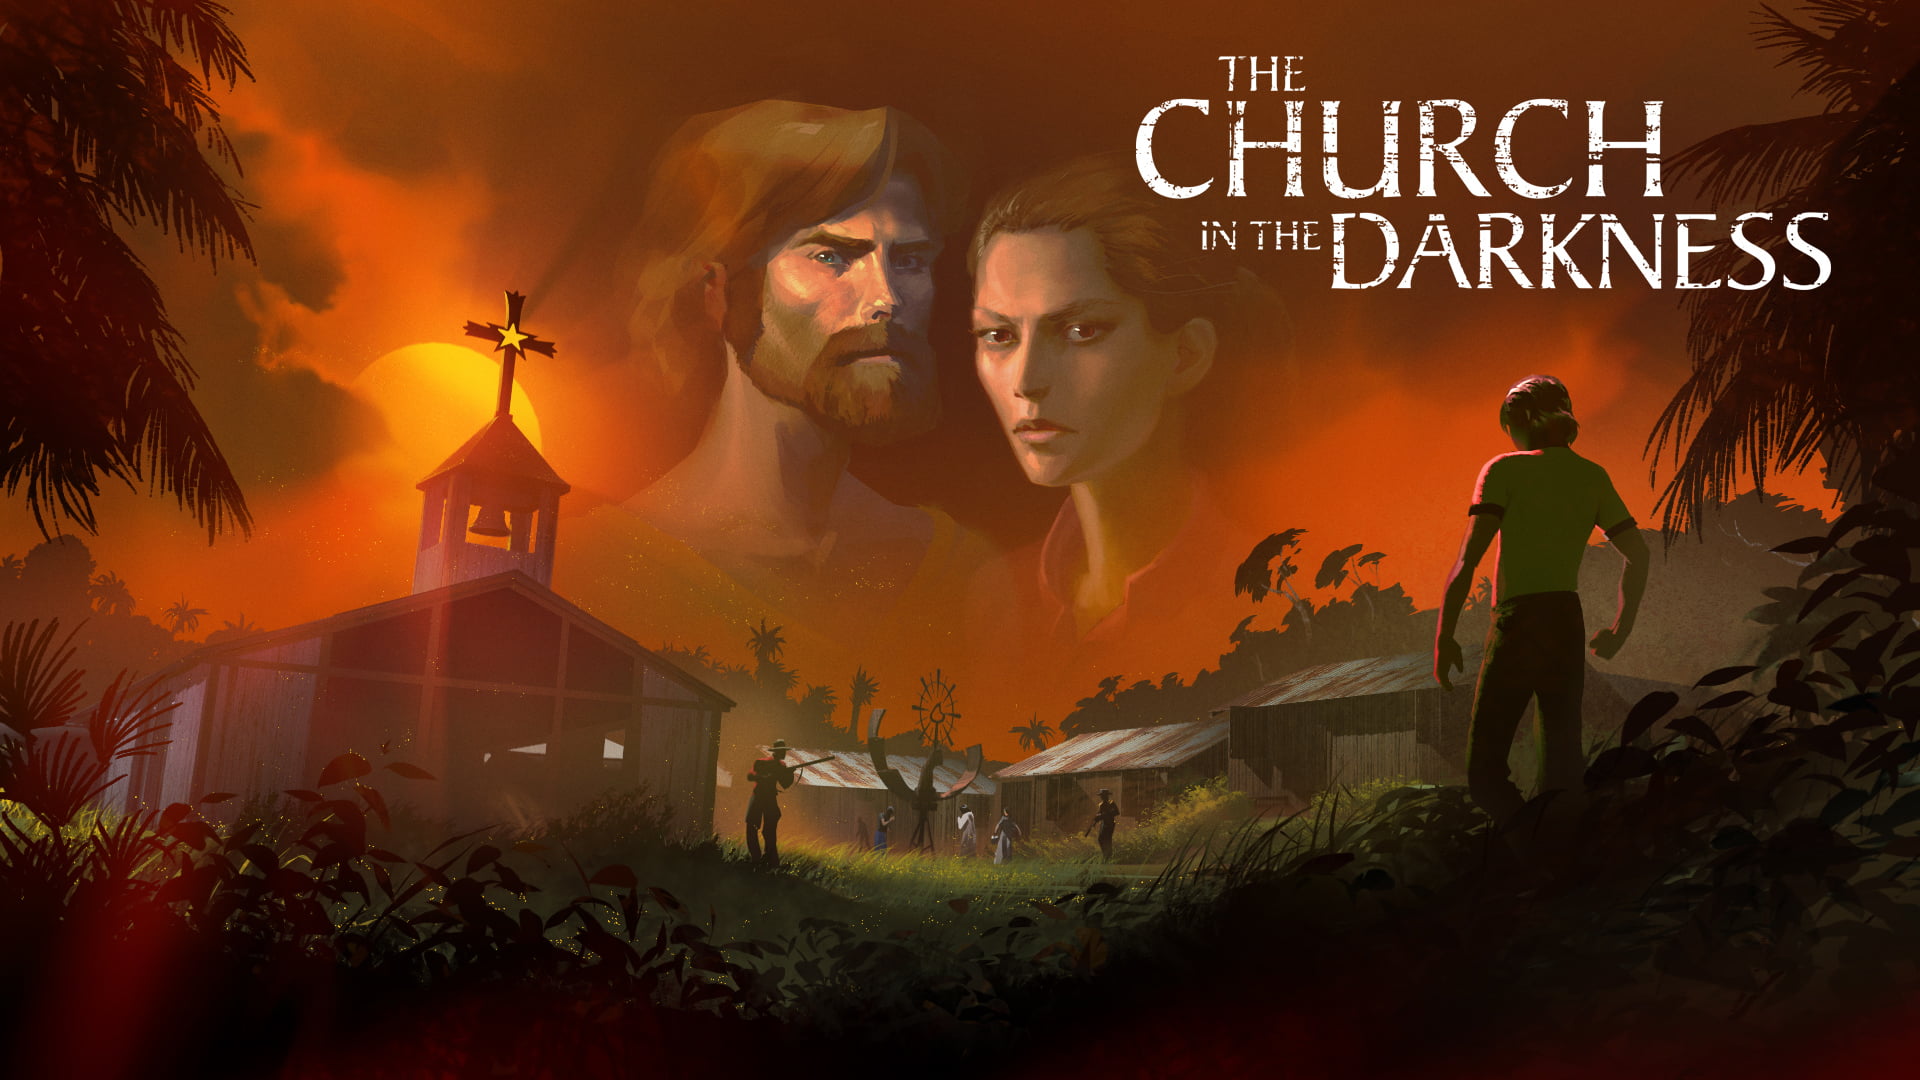 The church in the darkness - review | the church in the darkness | luna: the shadow dust análises